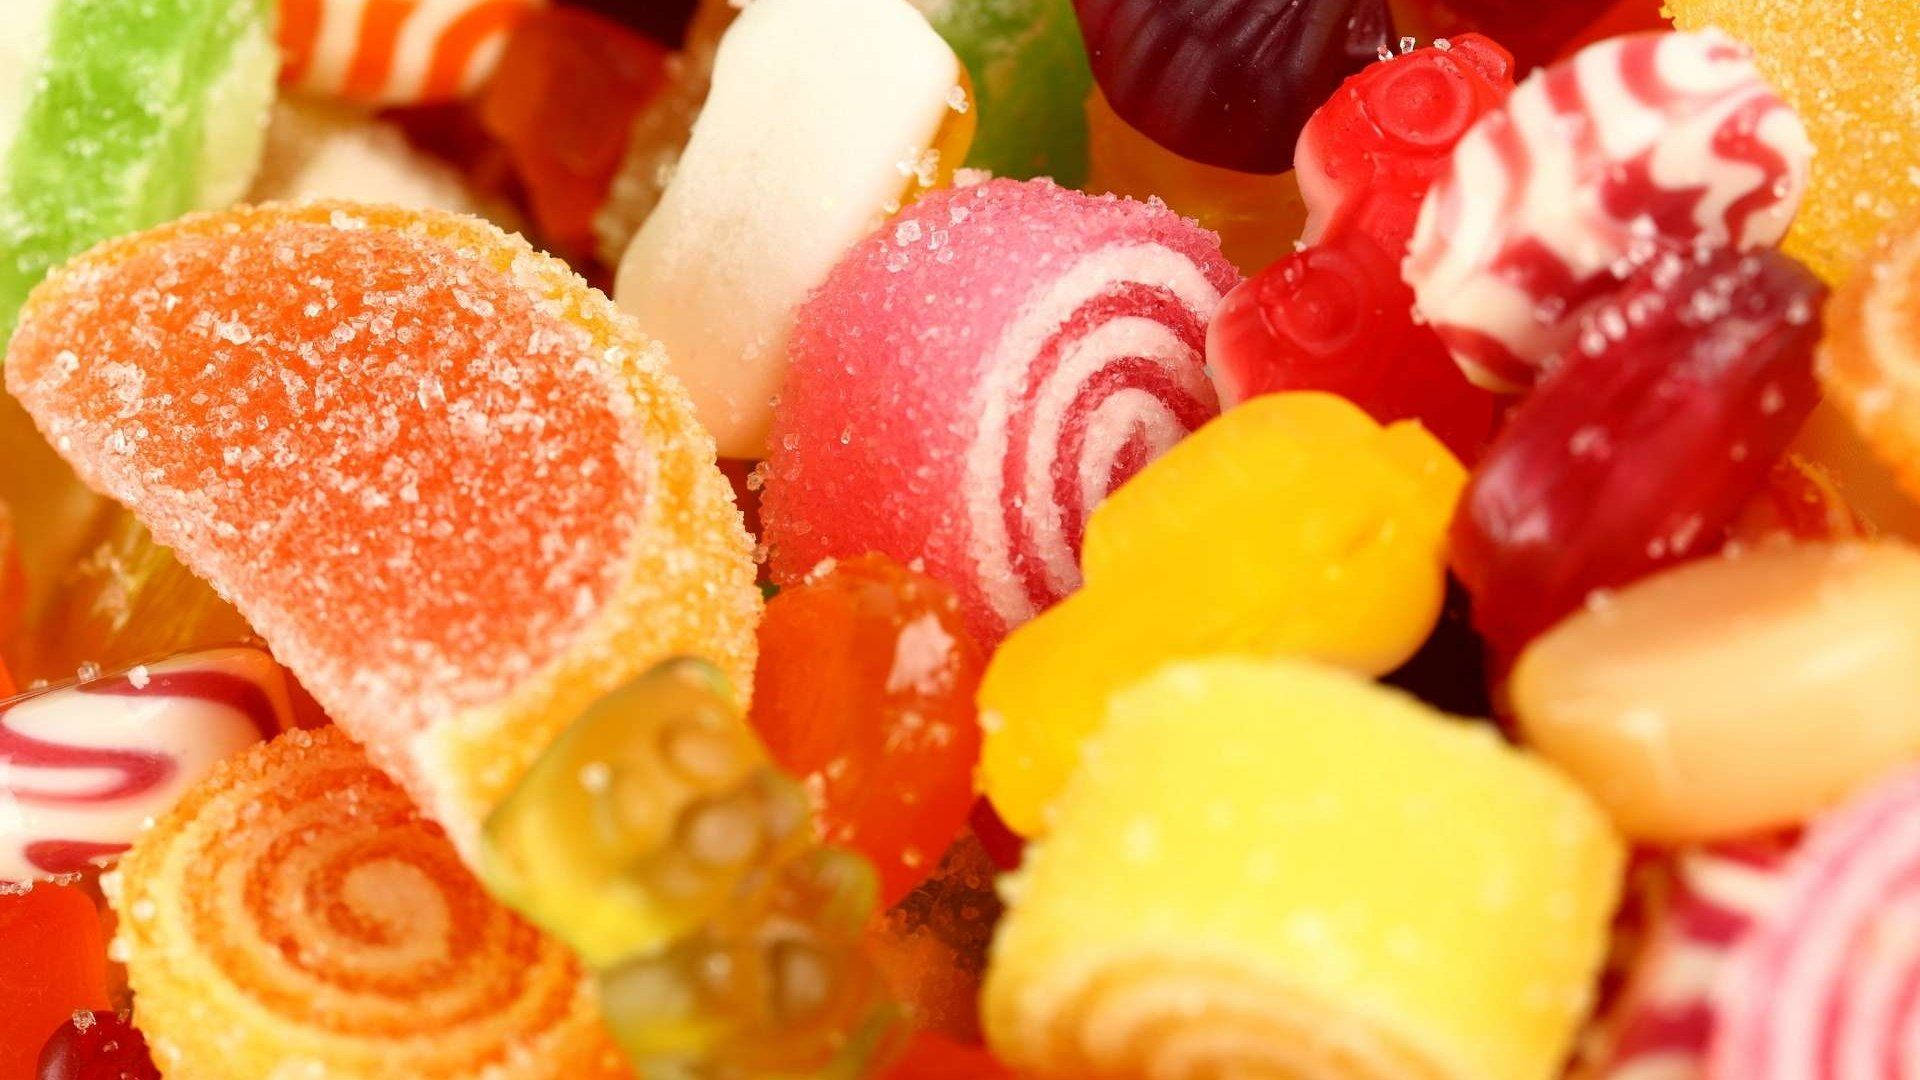 Sugar Coated Candies In Different Sizes And Shapes Wallpaper